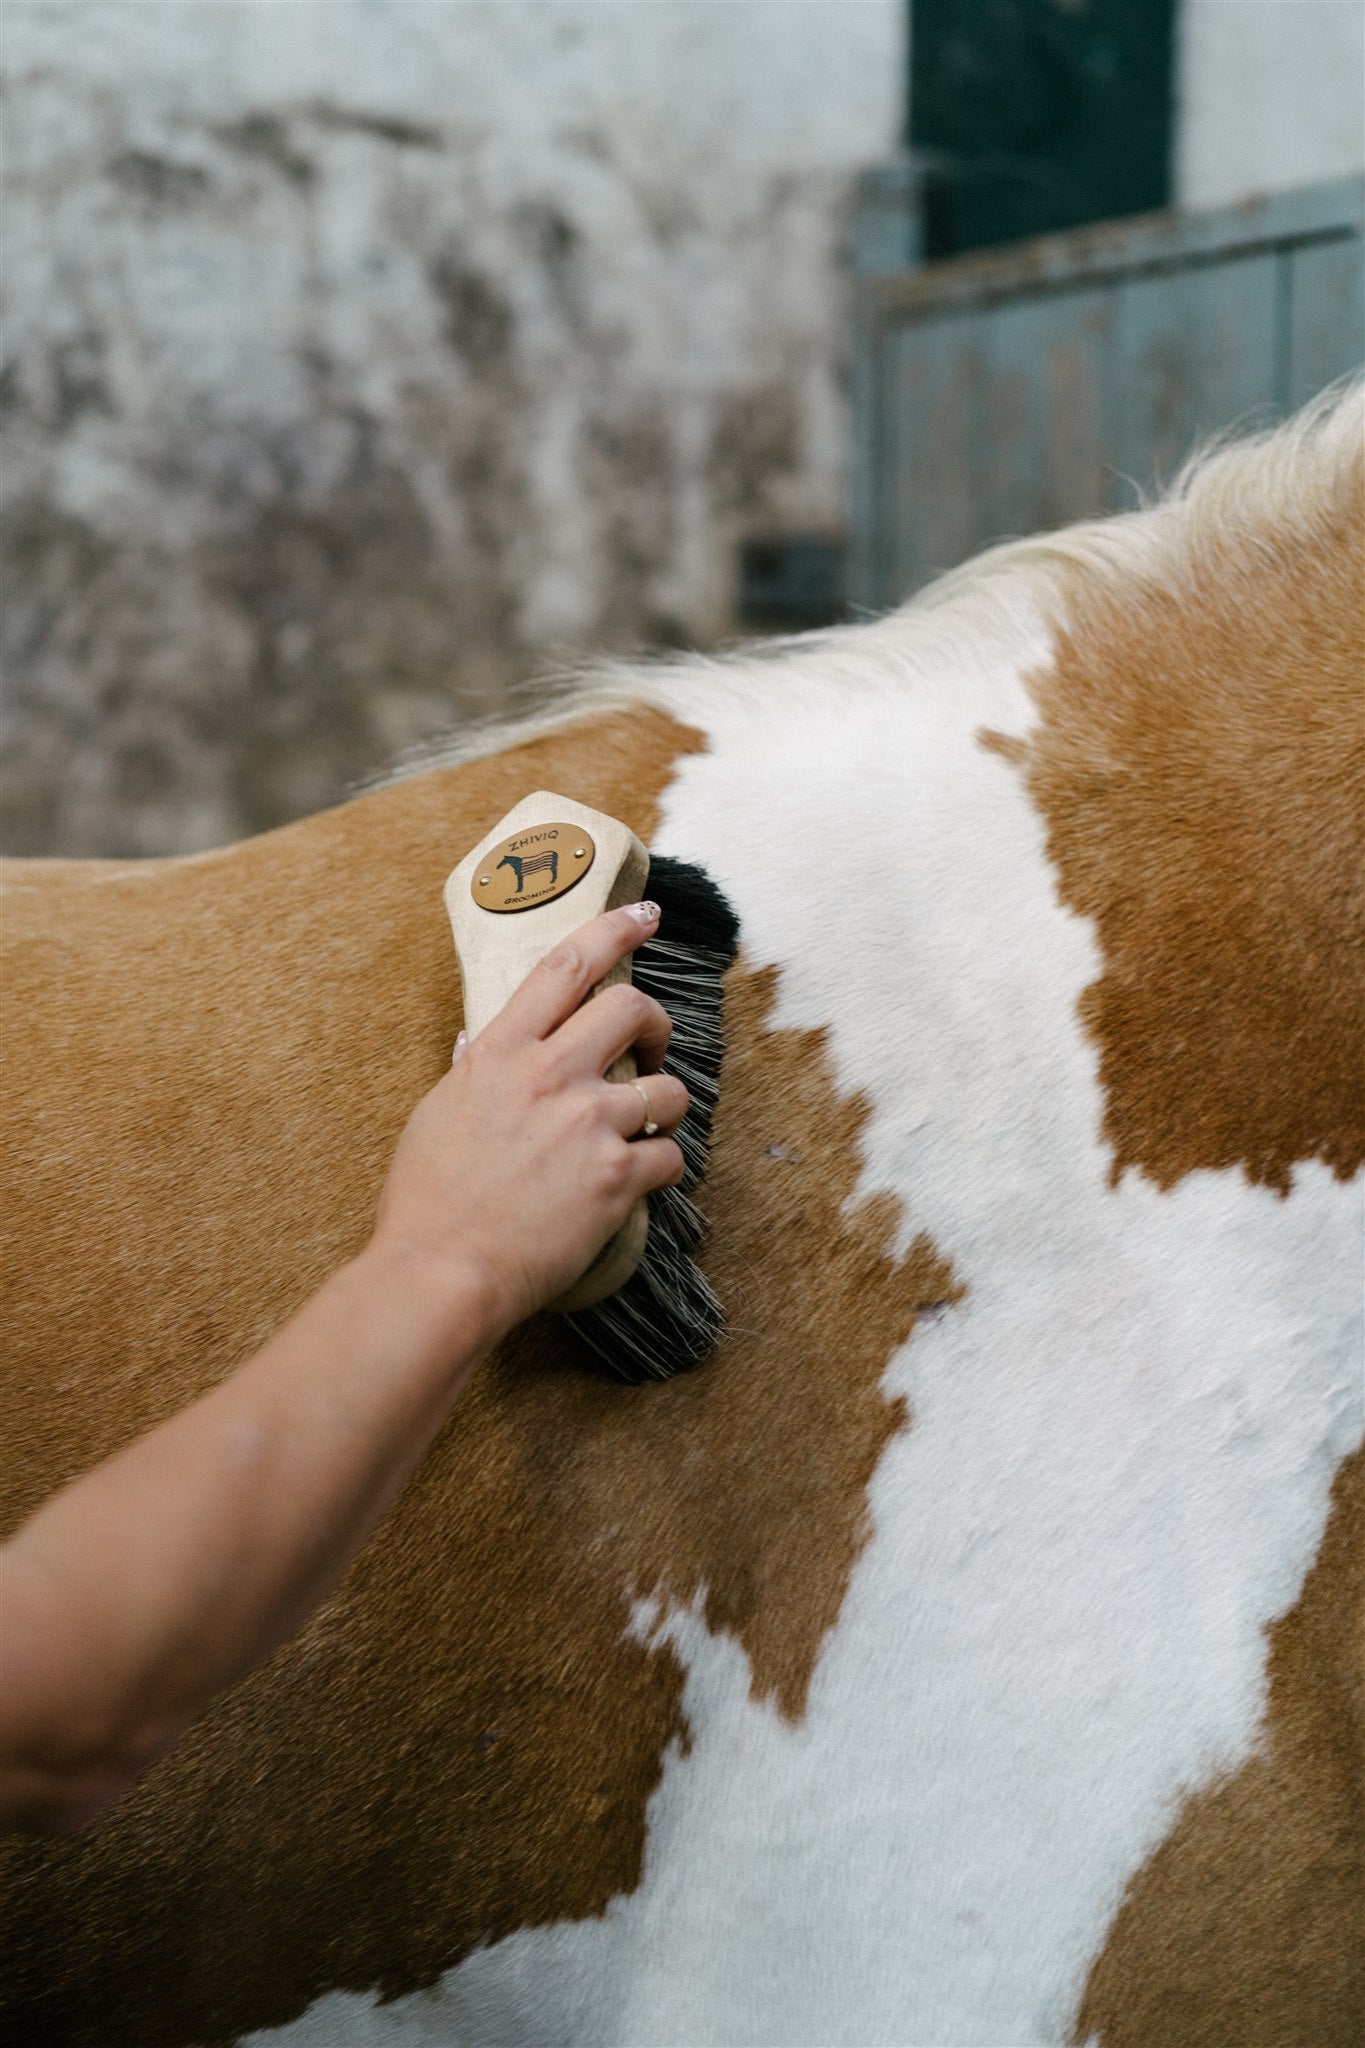 Everything you want to know about the brandZhiviq Banana Horse Hair - Horse Brush - Finishing brush - Suitable for sensitive areas of the body